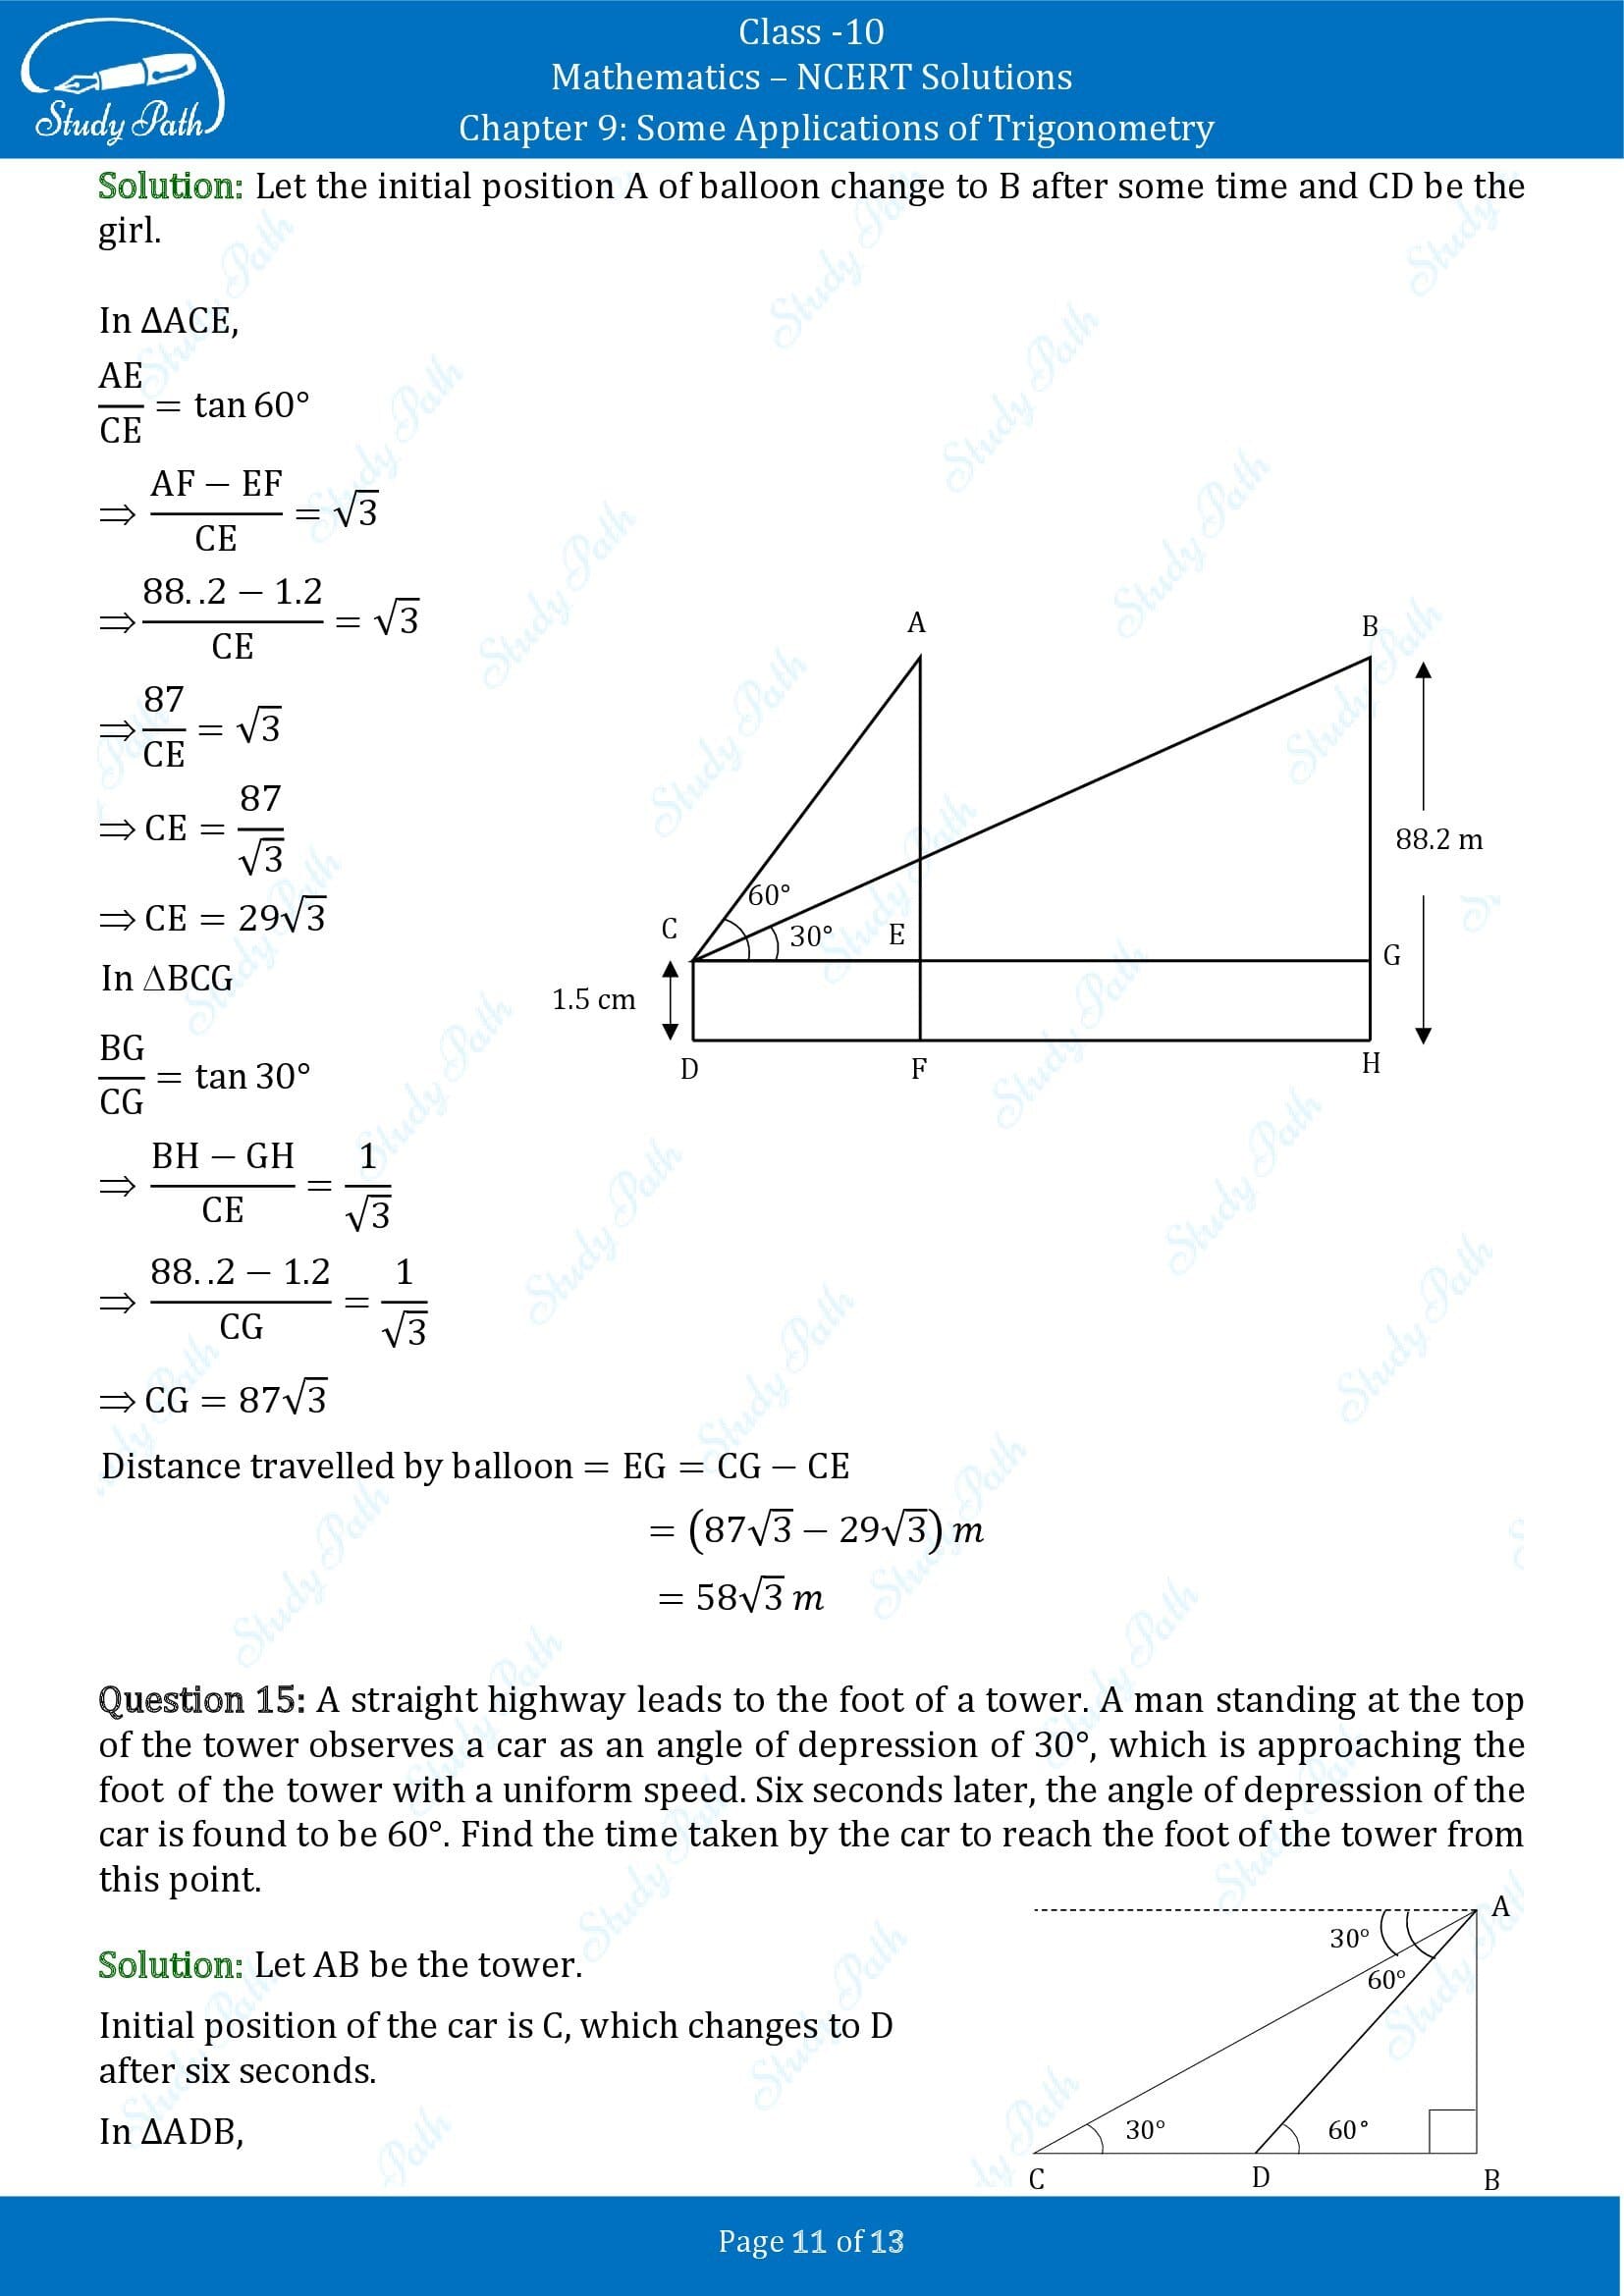 NCERT Solutions for Class 10 Maths Chapter 9 Some Applications of Trigonometry 00011